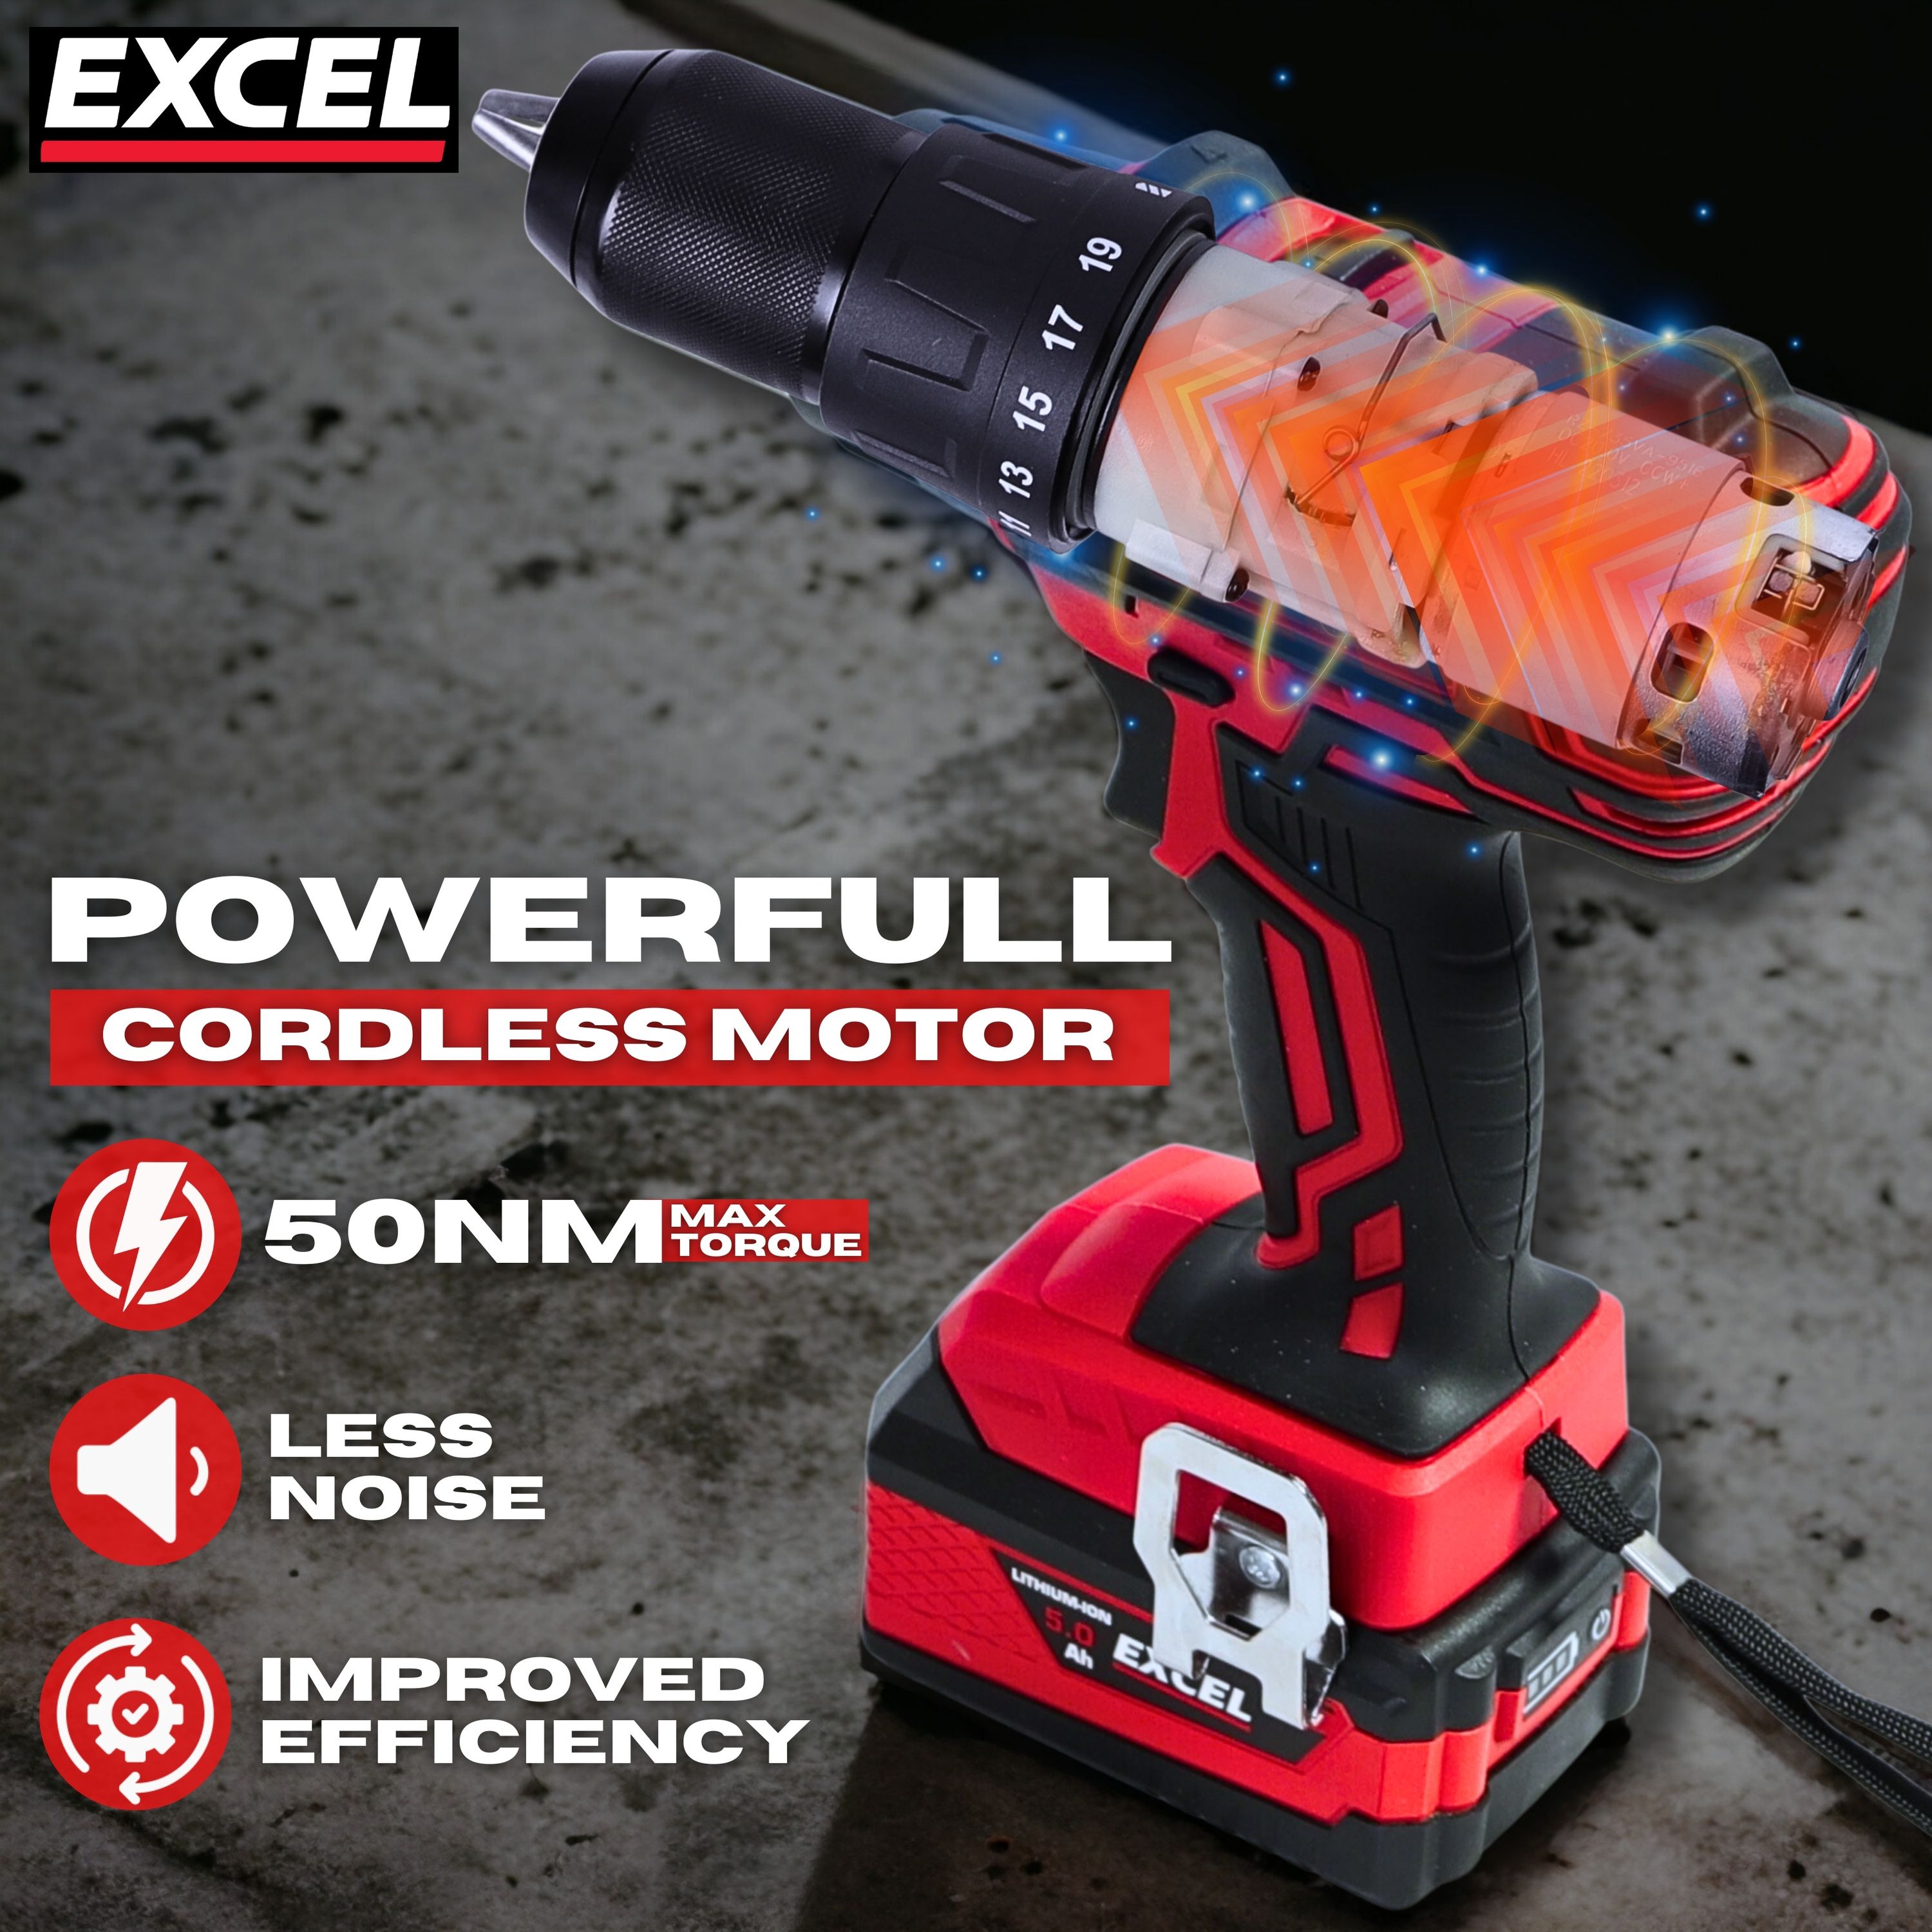 Excel 18V Cordless Combi Drill with 1 x 5.0Ah Battery Charger & Bag EXL10054